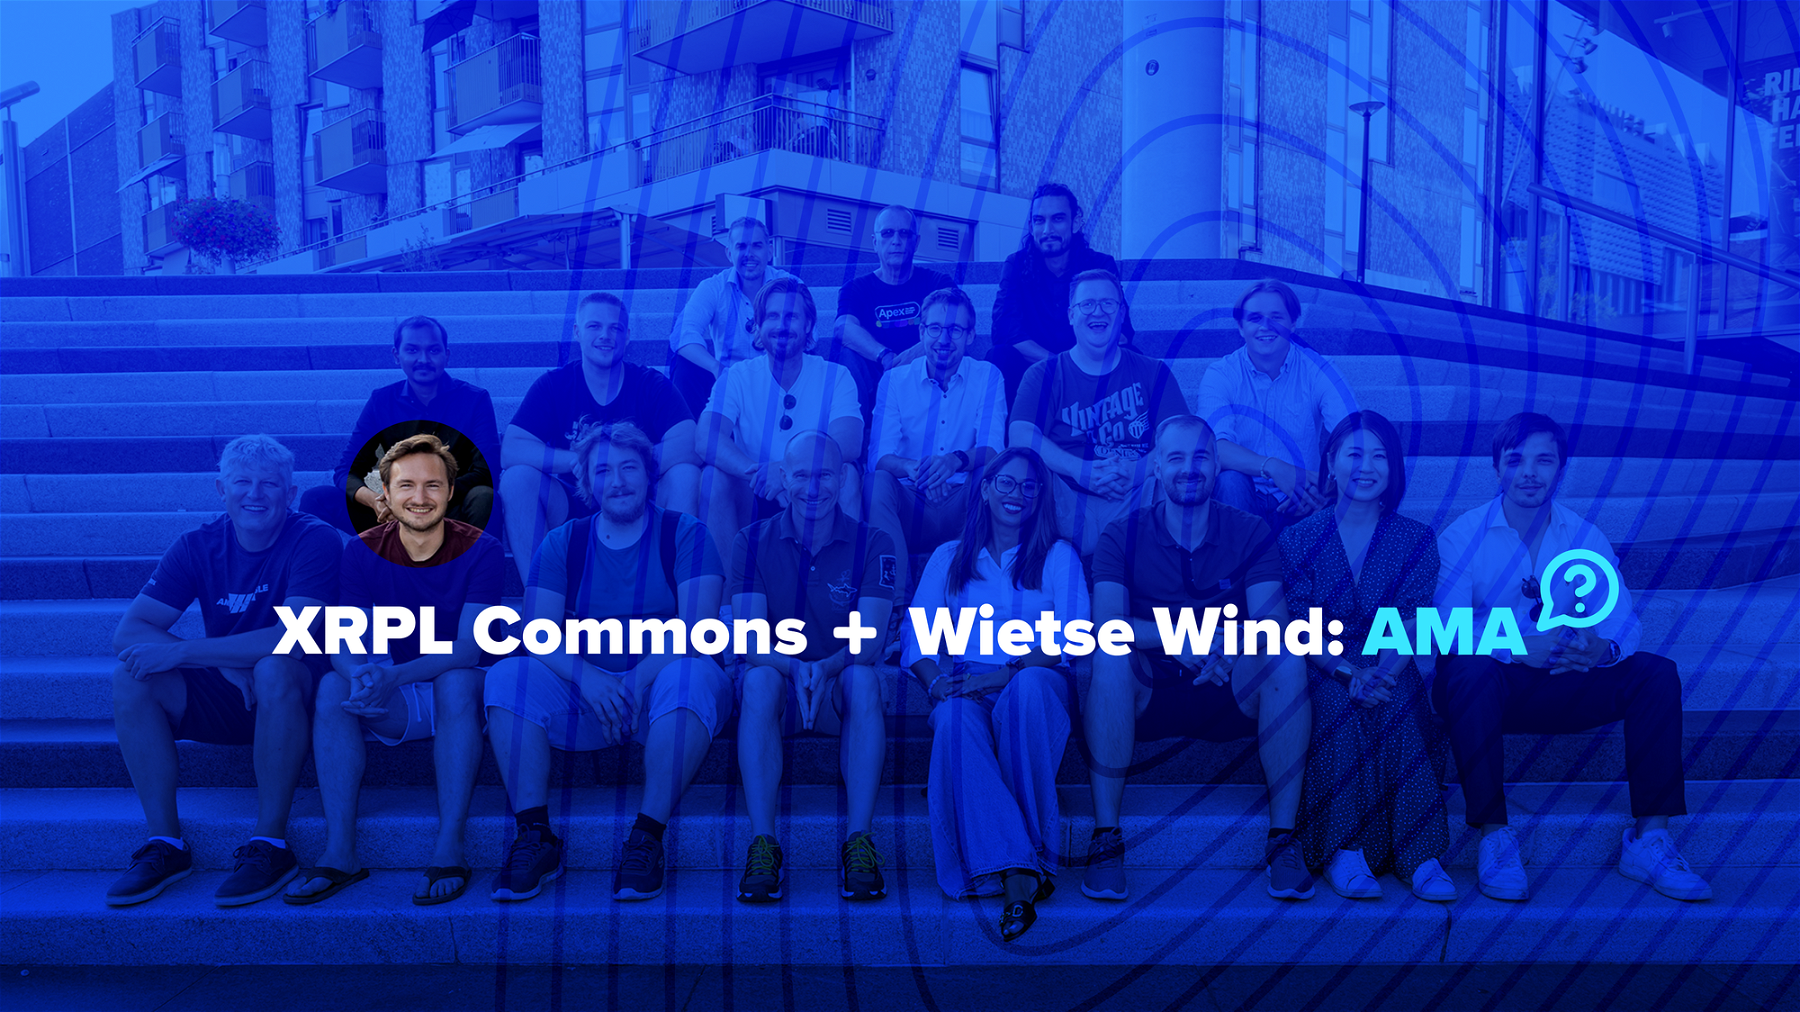 XRPL Commons × Wietse Wind: Ask Me Anything